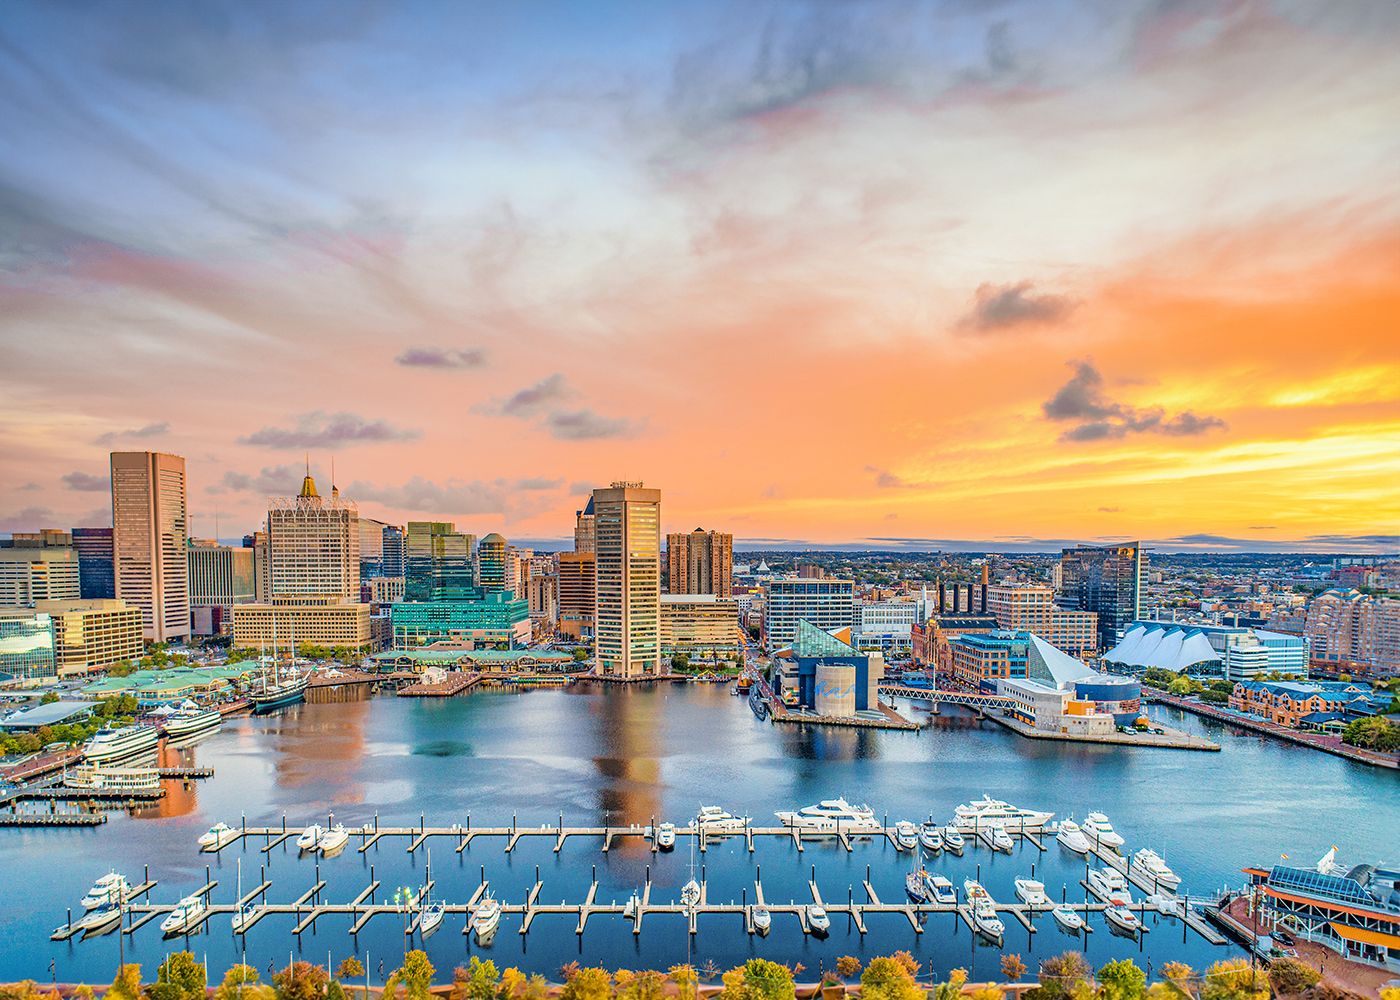 The skyline of Baltimore, MD at sunset